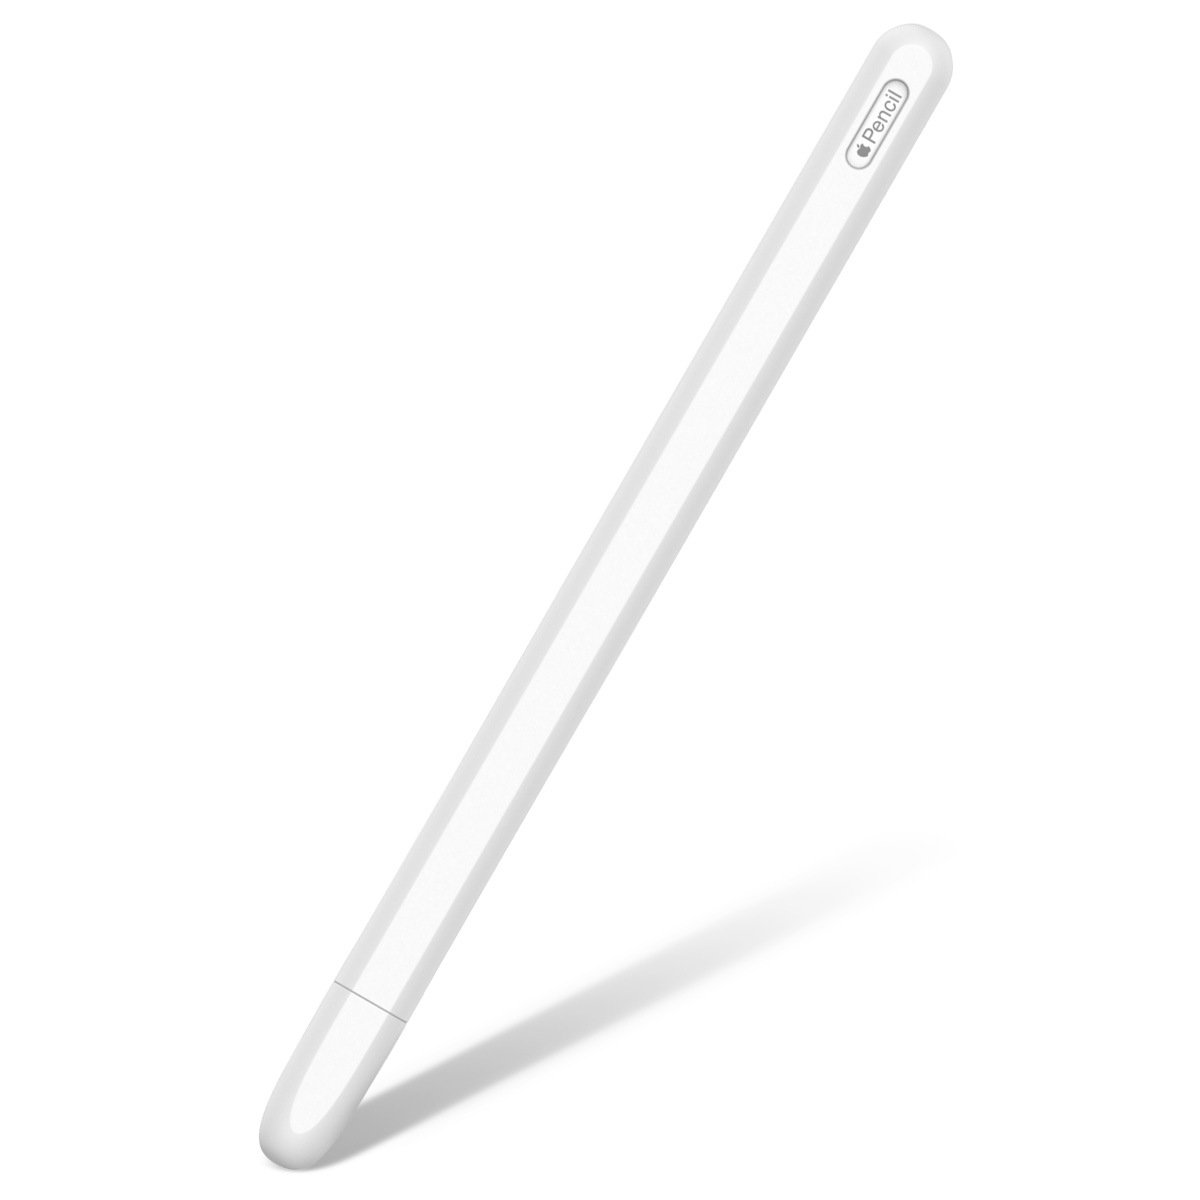 Bakeey Anti-slip Anti-fall Silicone Touch Screen Stylus Pen Protective Case for Apple Pencil 2nd Generation